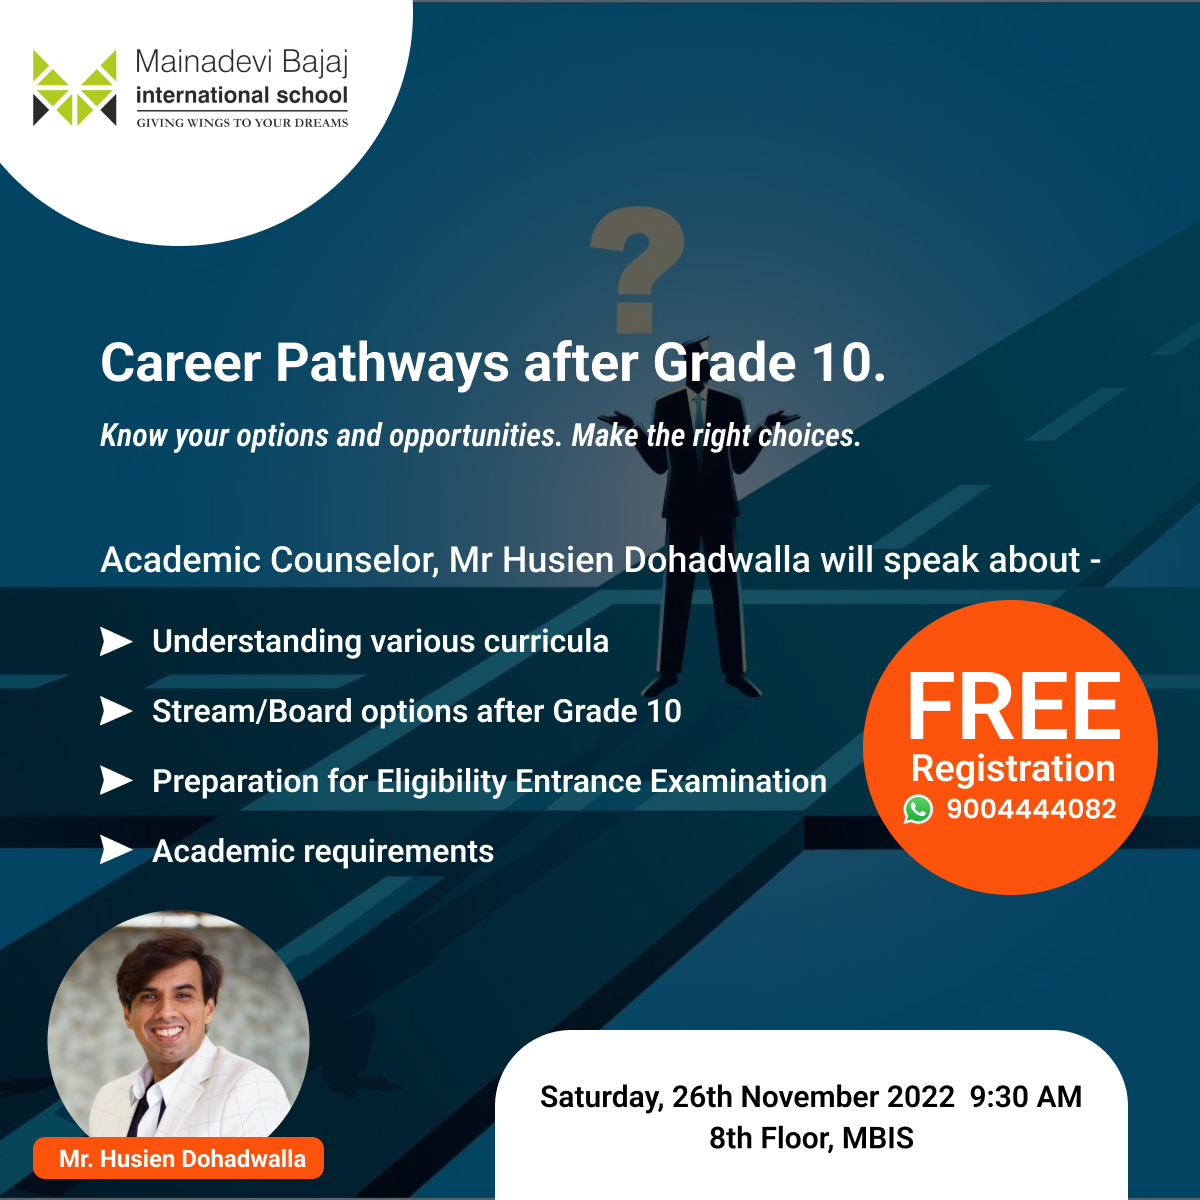 Know your career options after Grade 10. Get the right guidance to meet your goals., Mumbai, Maharashtra, India